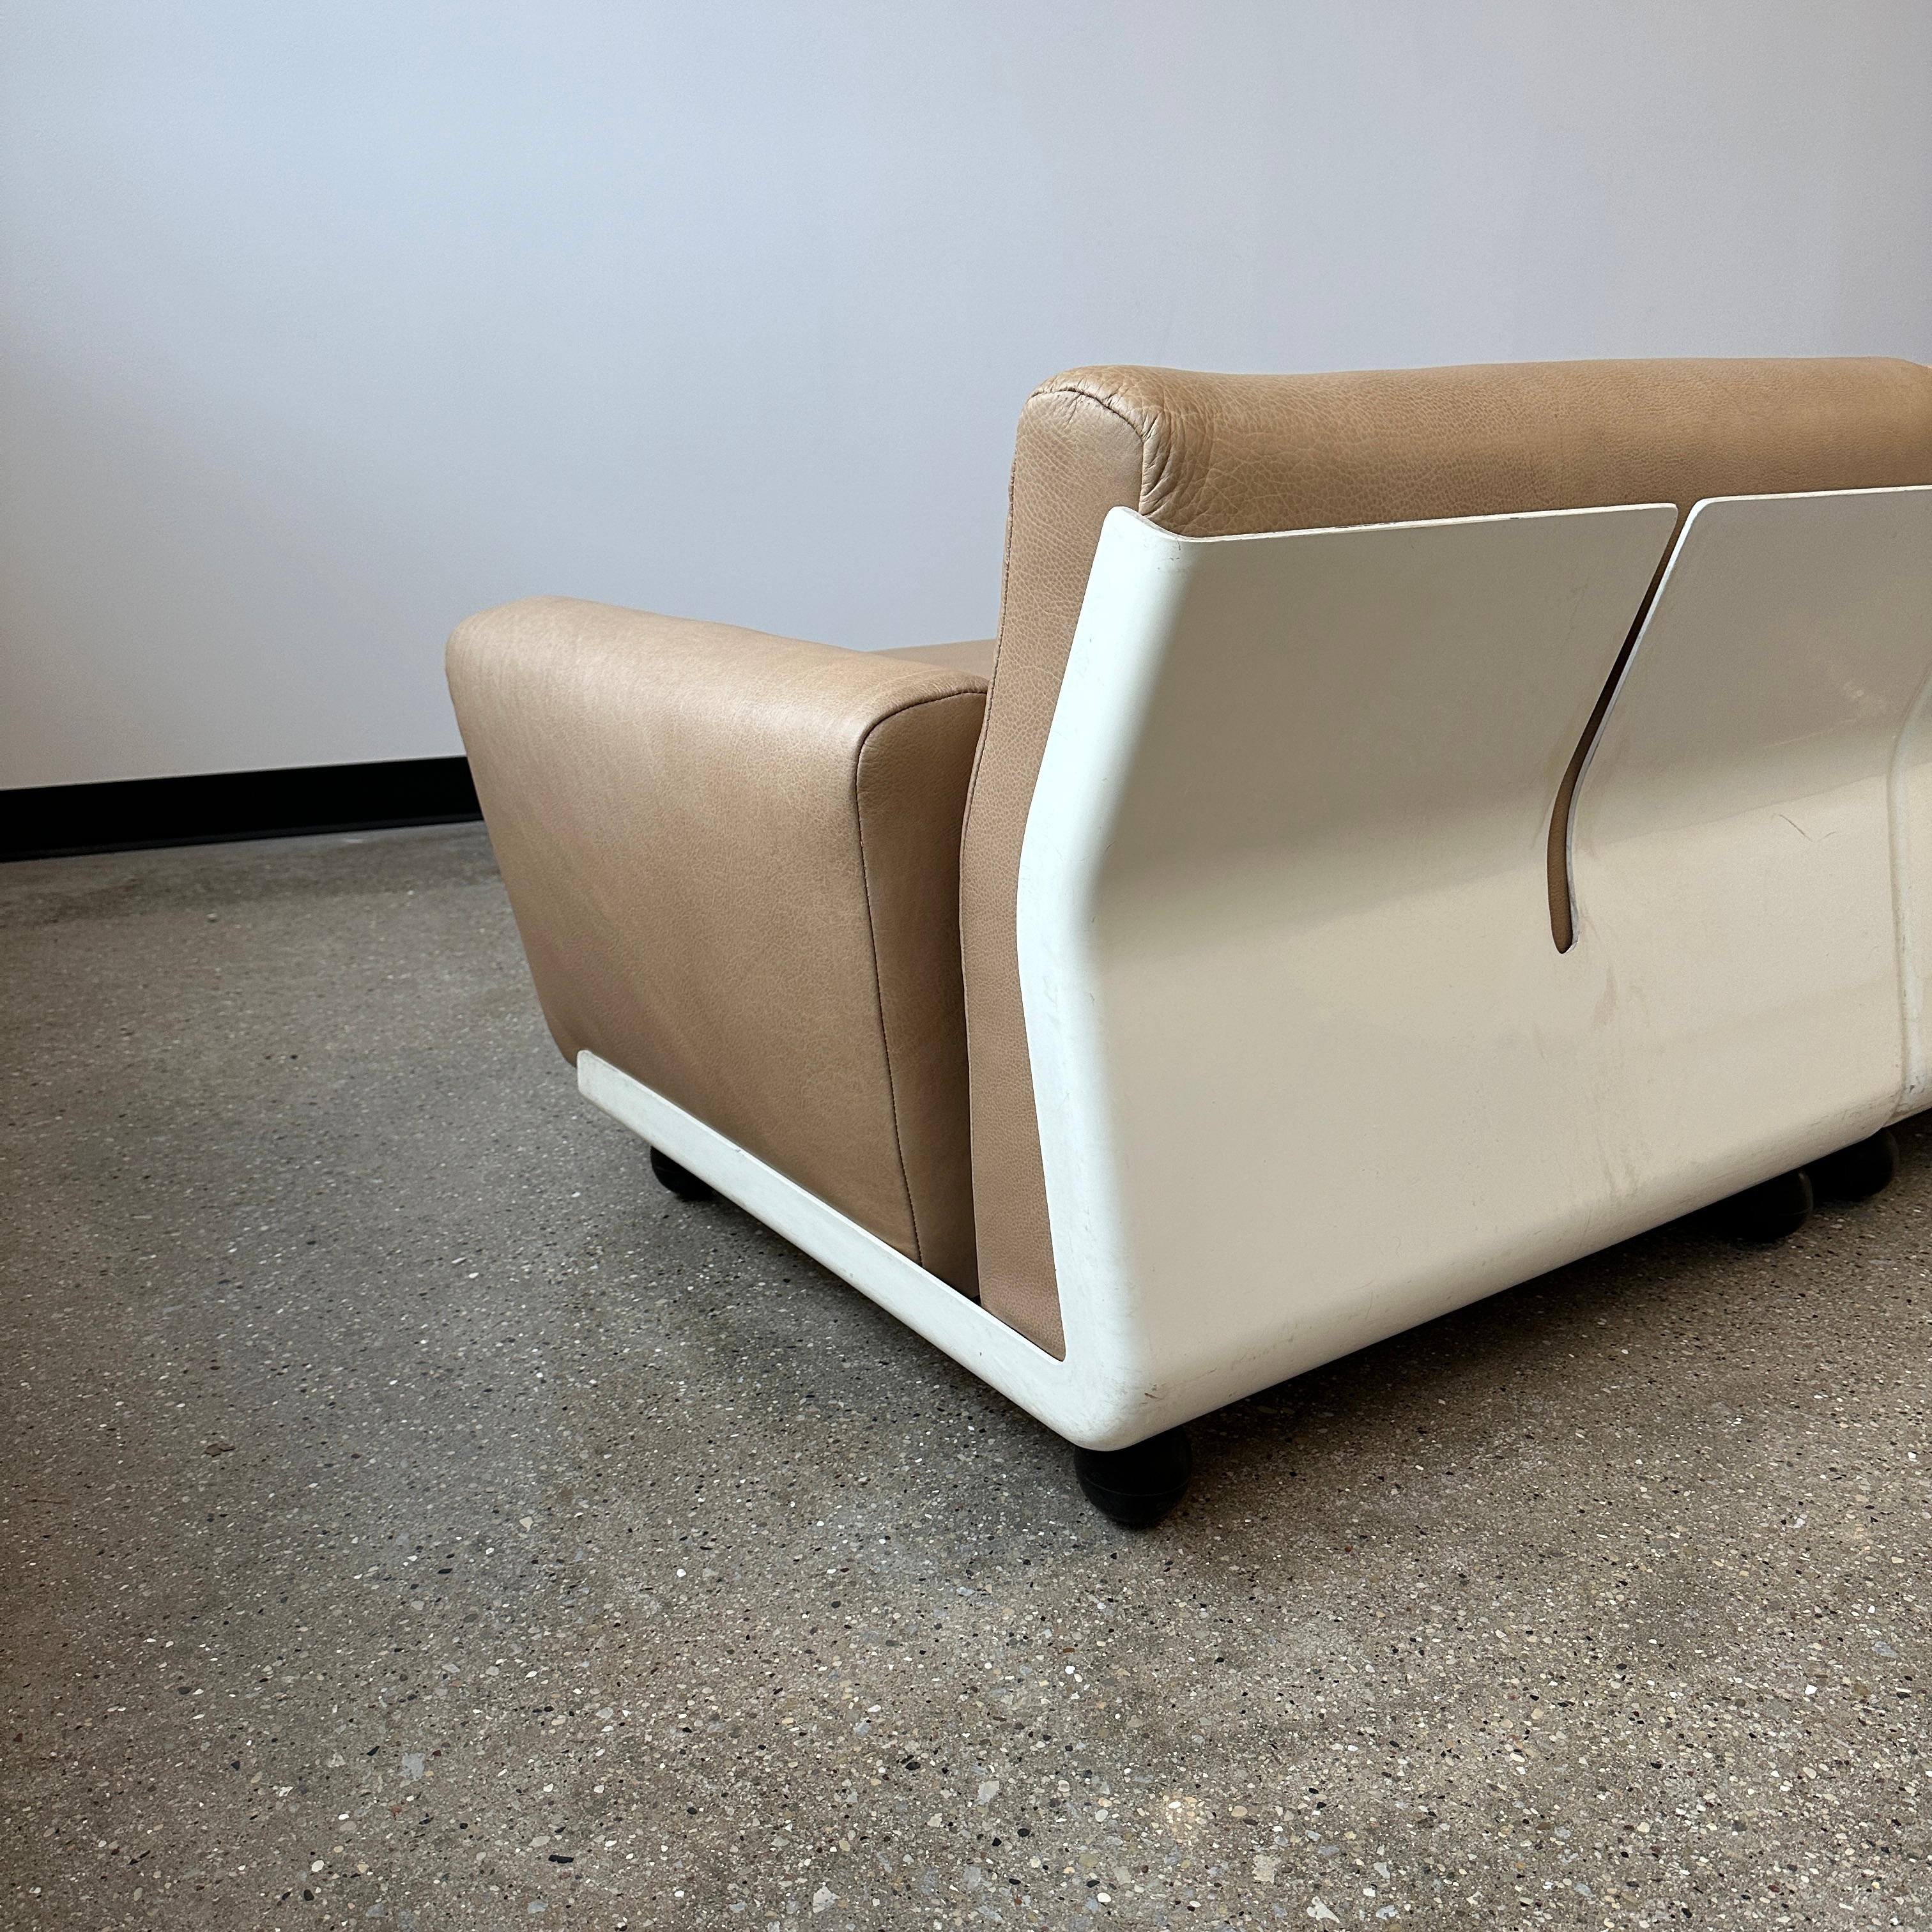 by C&B Italia c. 1968 and fully restored in leather. This piece has been signed + dated by the manufacturing team. The original maker’s insignia is also present on each piece. The fiberglass shells have some wear consistent with age and use on them,